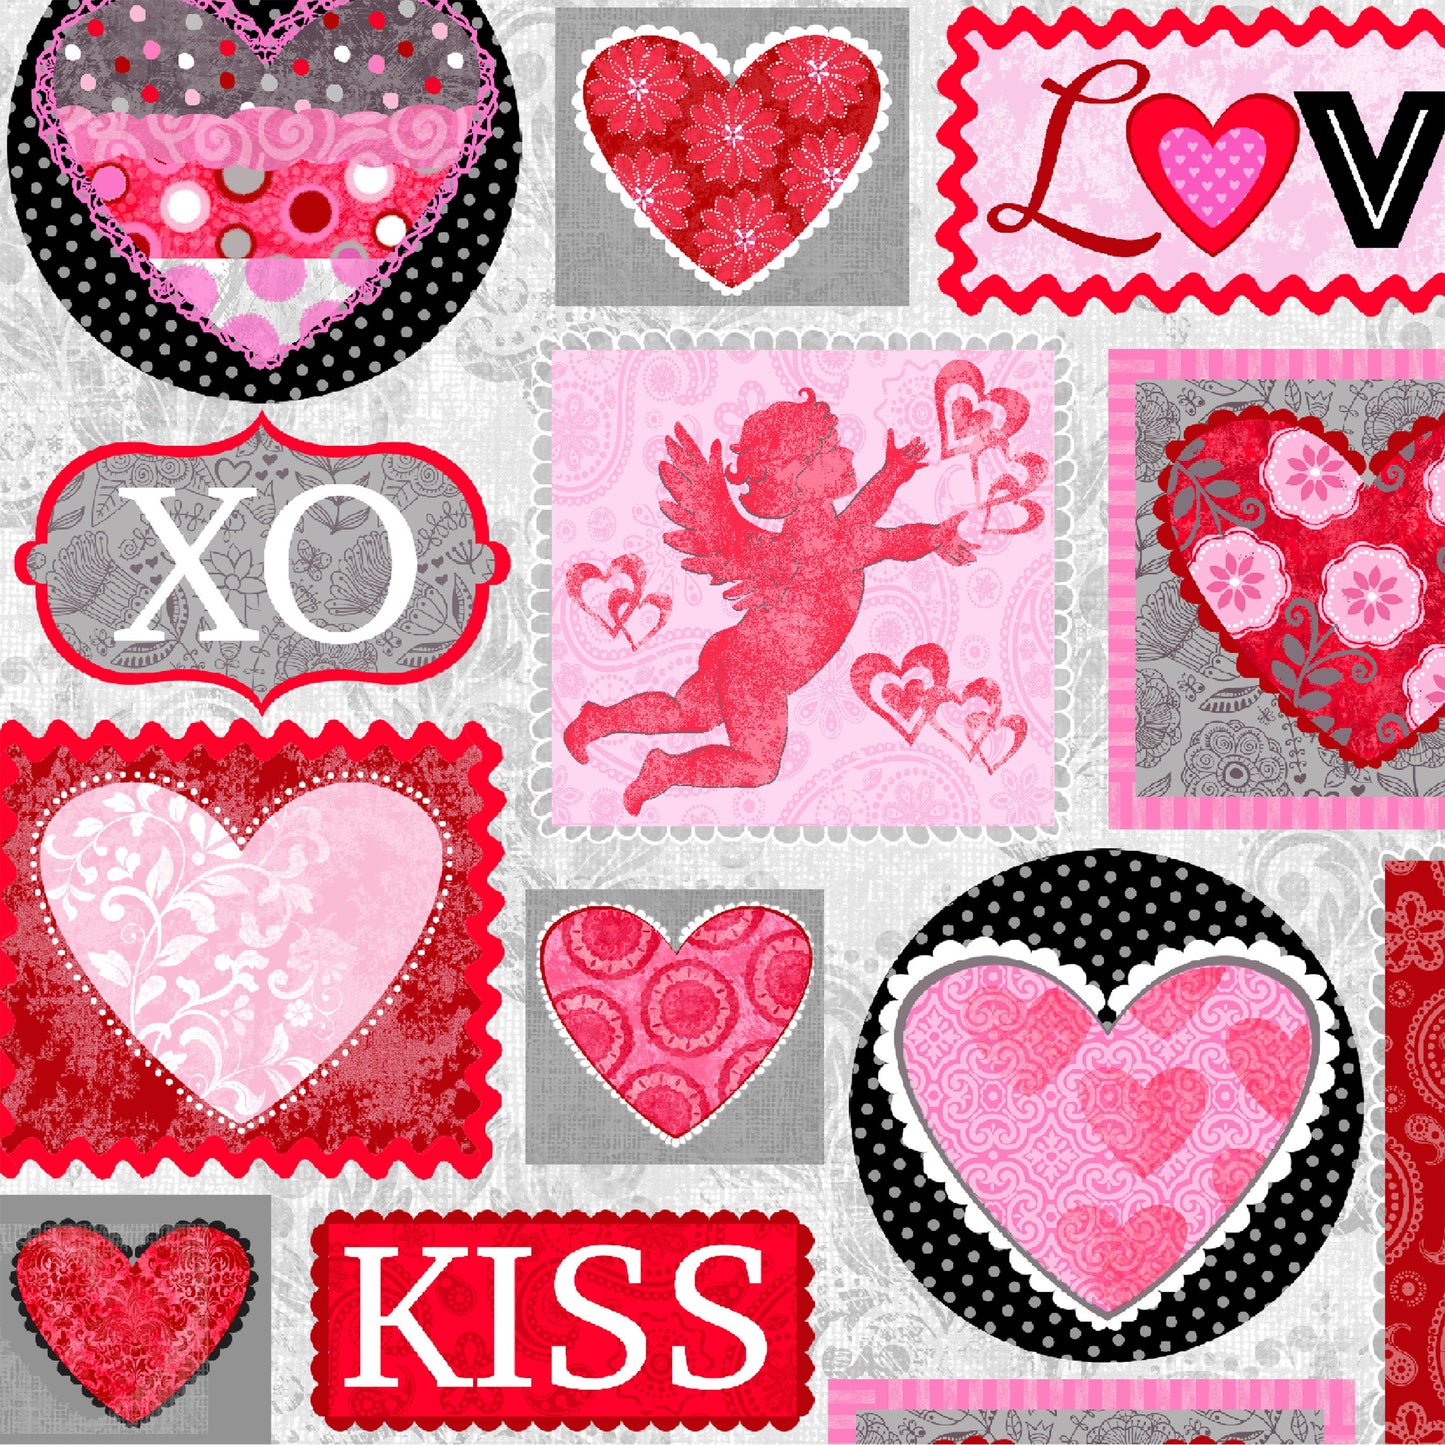 Hearts Of Love by Sharla Fults Valentine Patch Cotton Woven Fabric